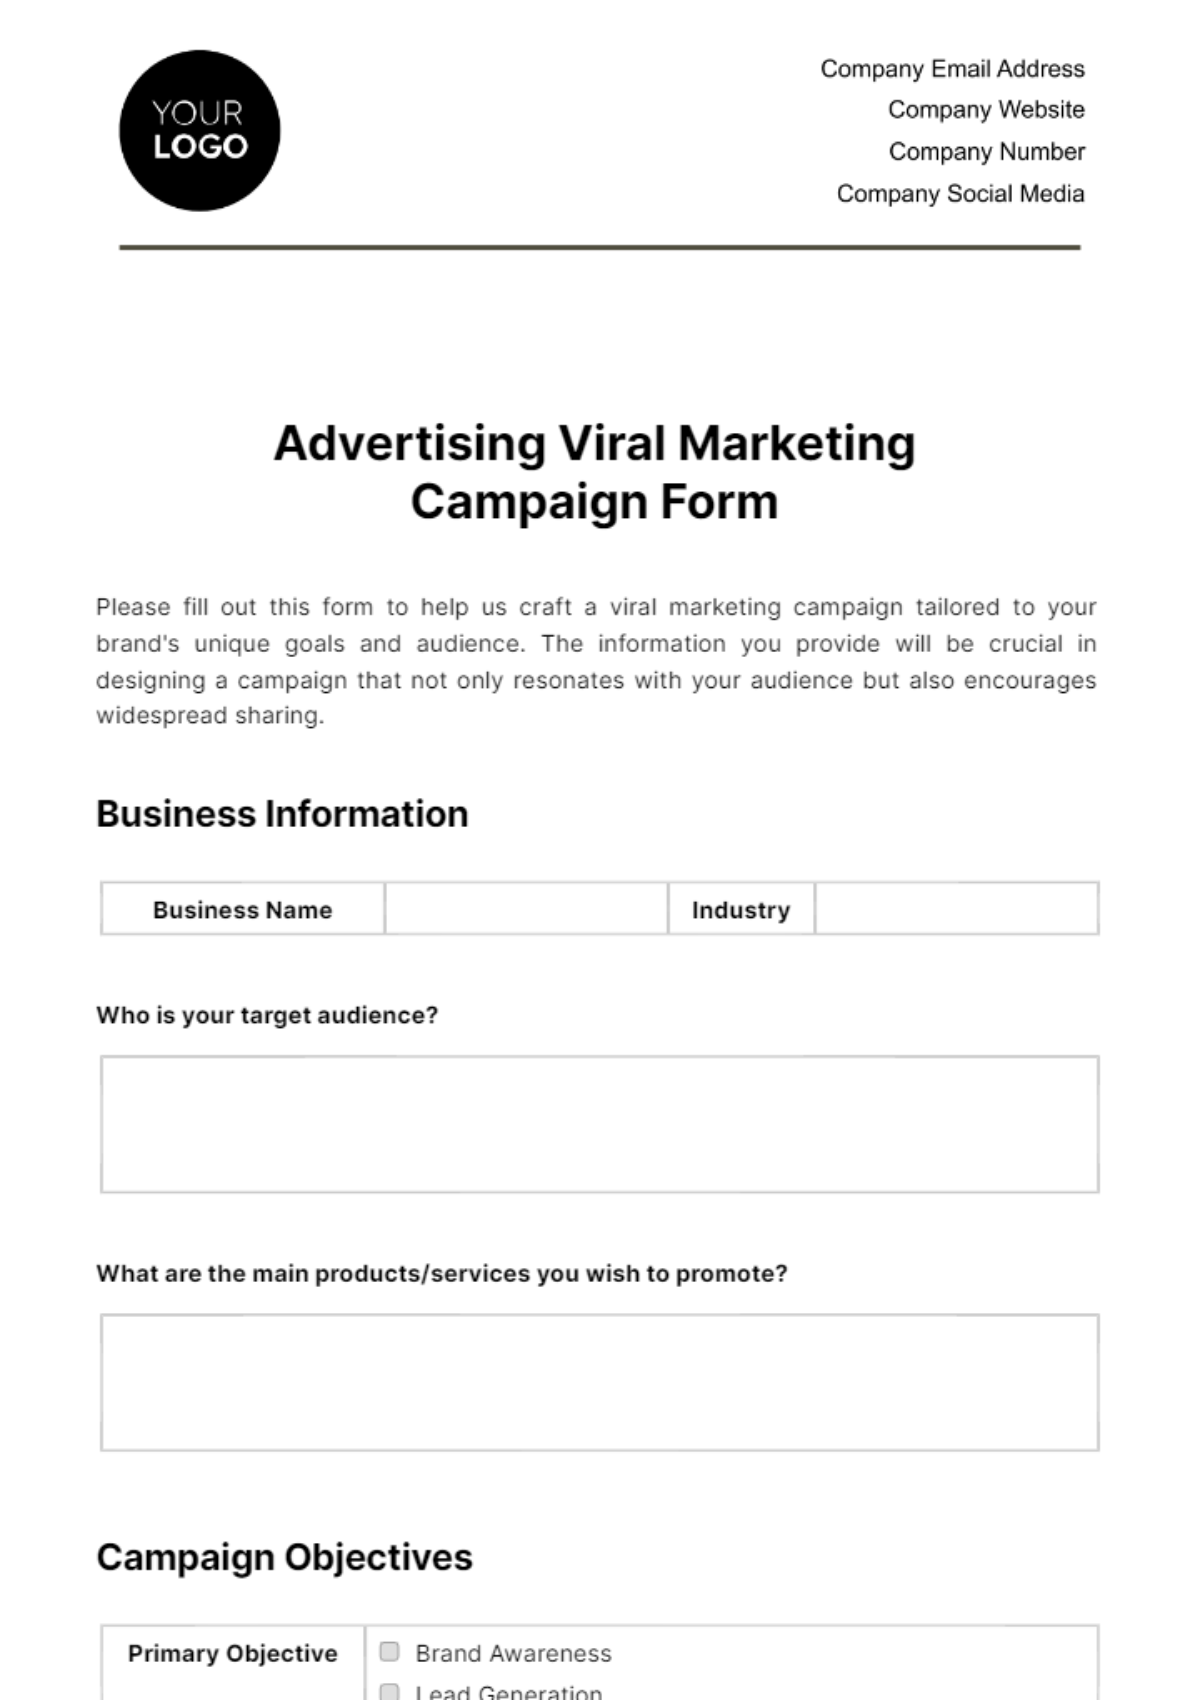 Free Advertising Viral Marketing Campaign Form Template